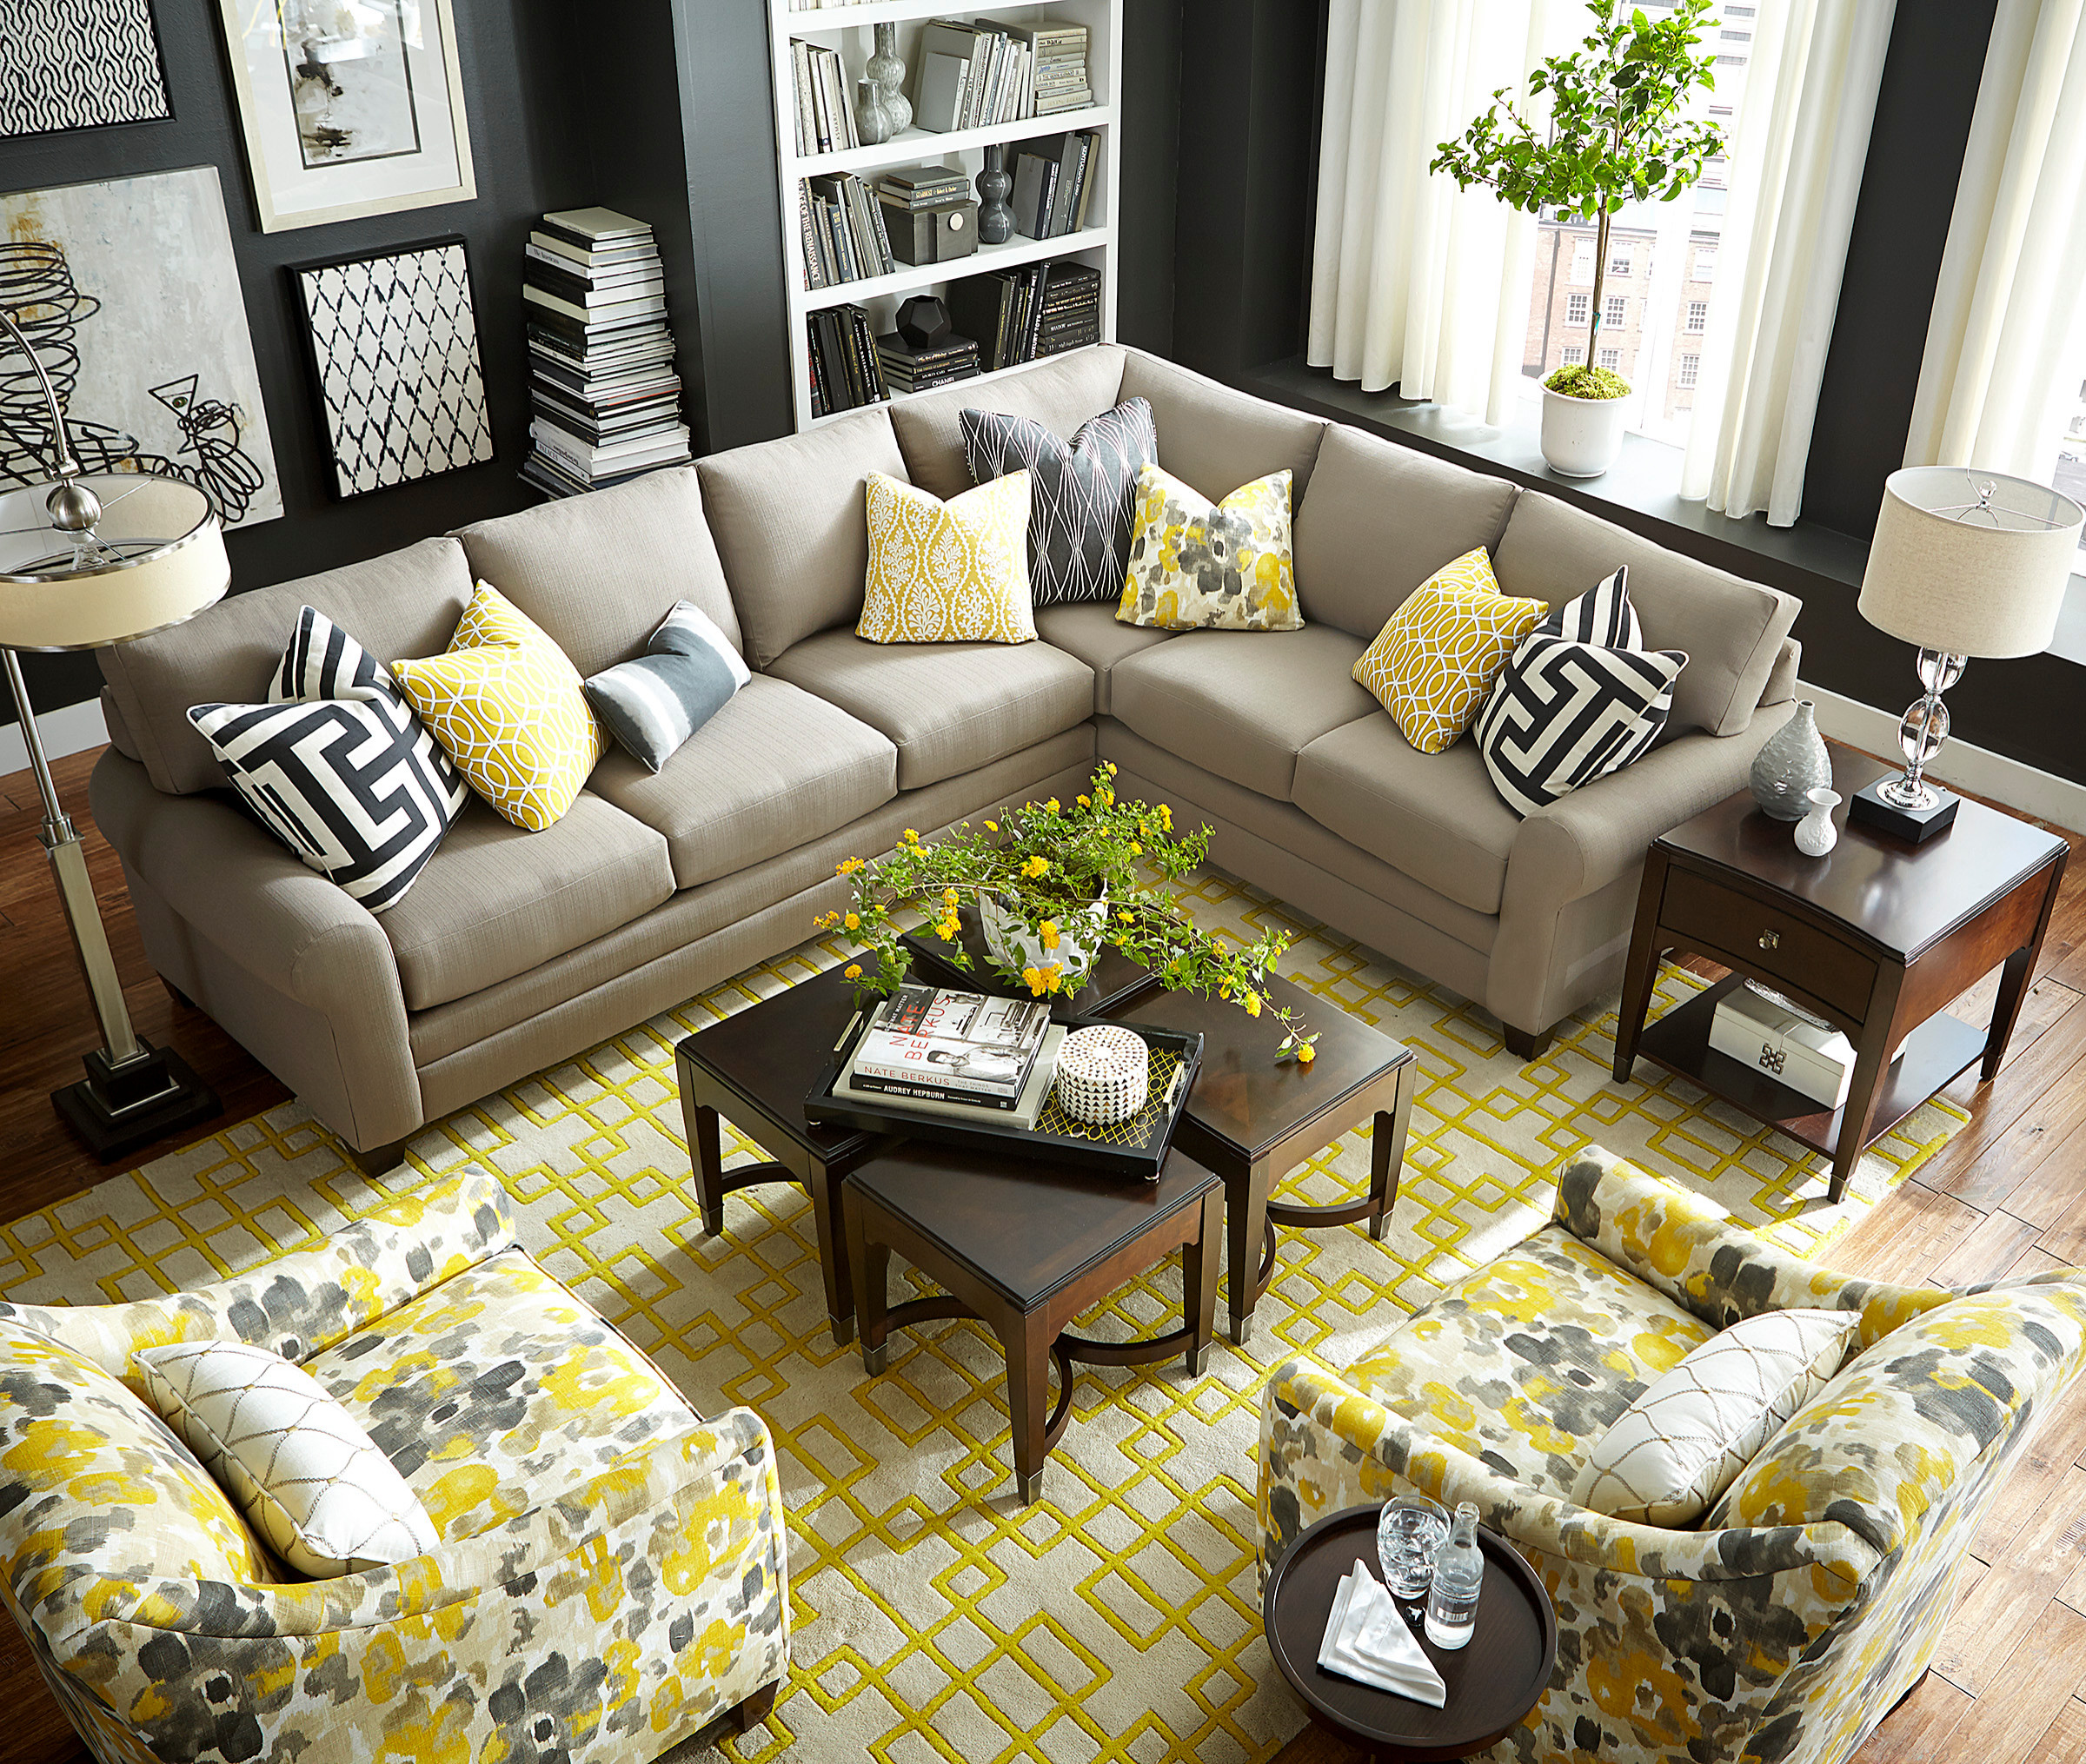 L Shaped Sectional - Photos & Ideas | Houzz